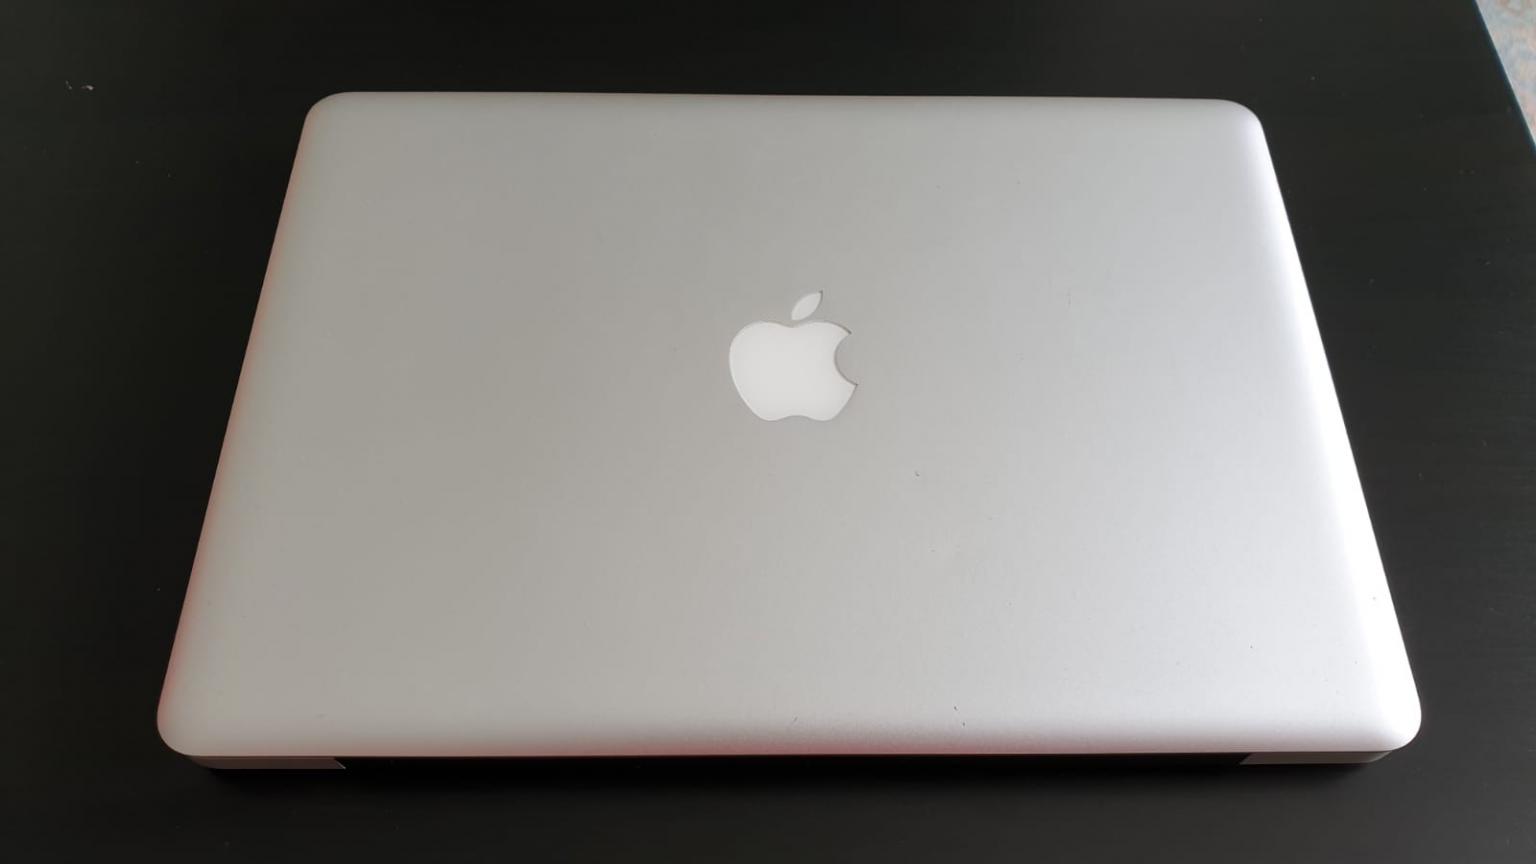 Macos mojave patcher not working for macbook air 2011 price